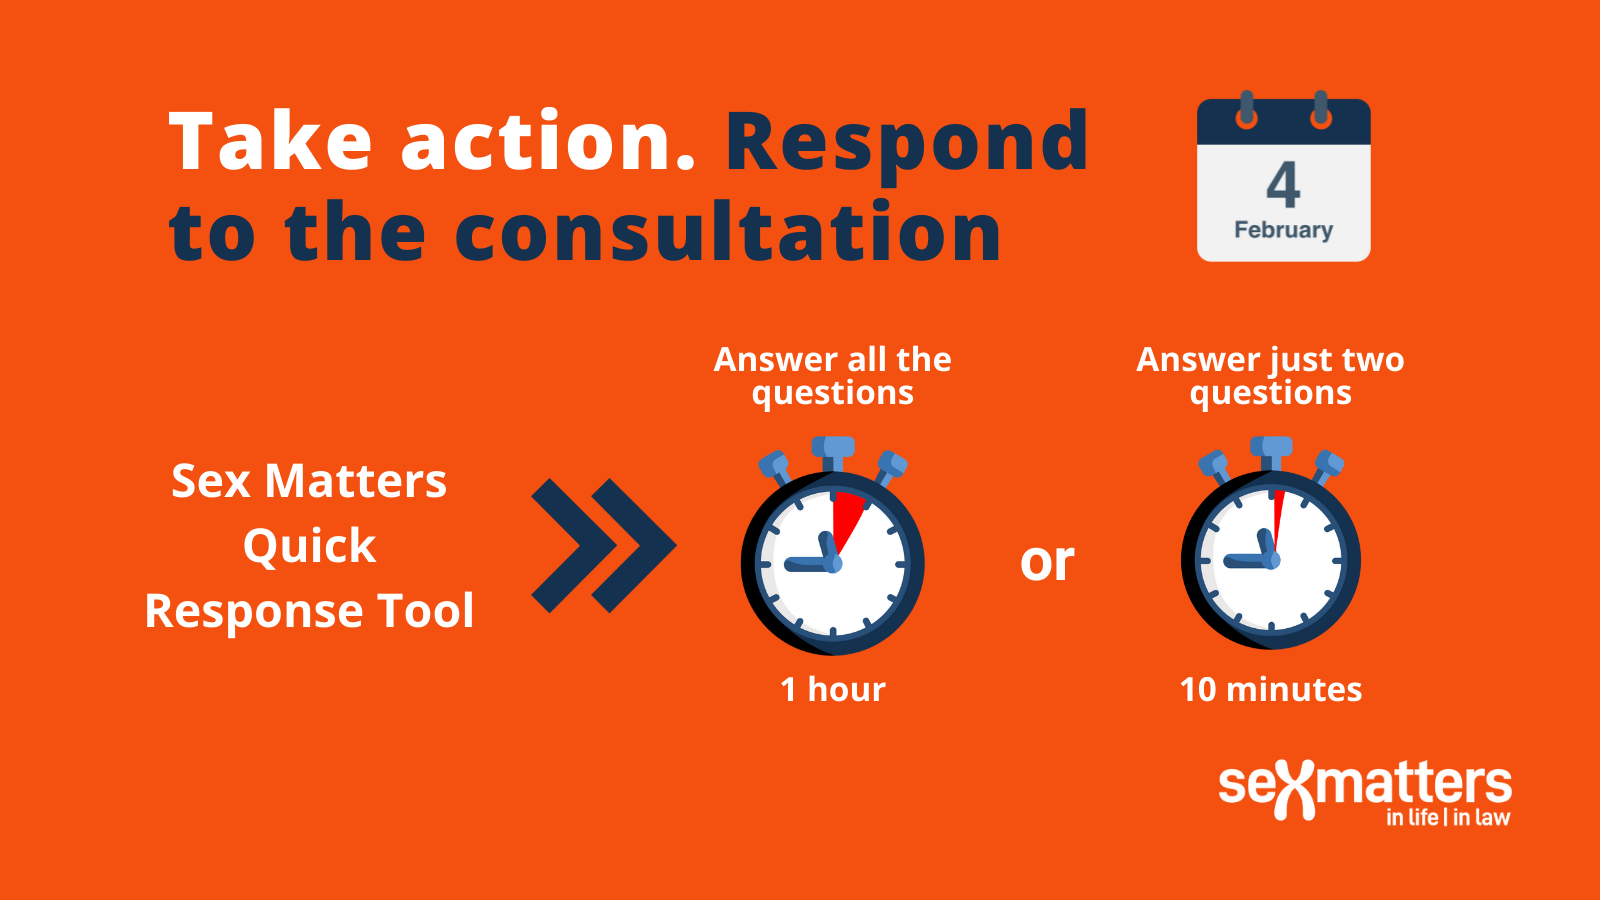 Take action. Respond to the consultation.